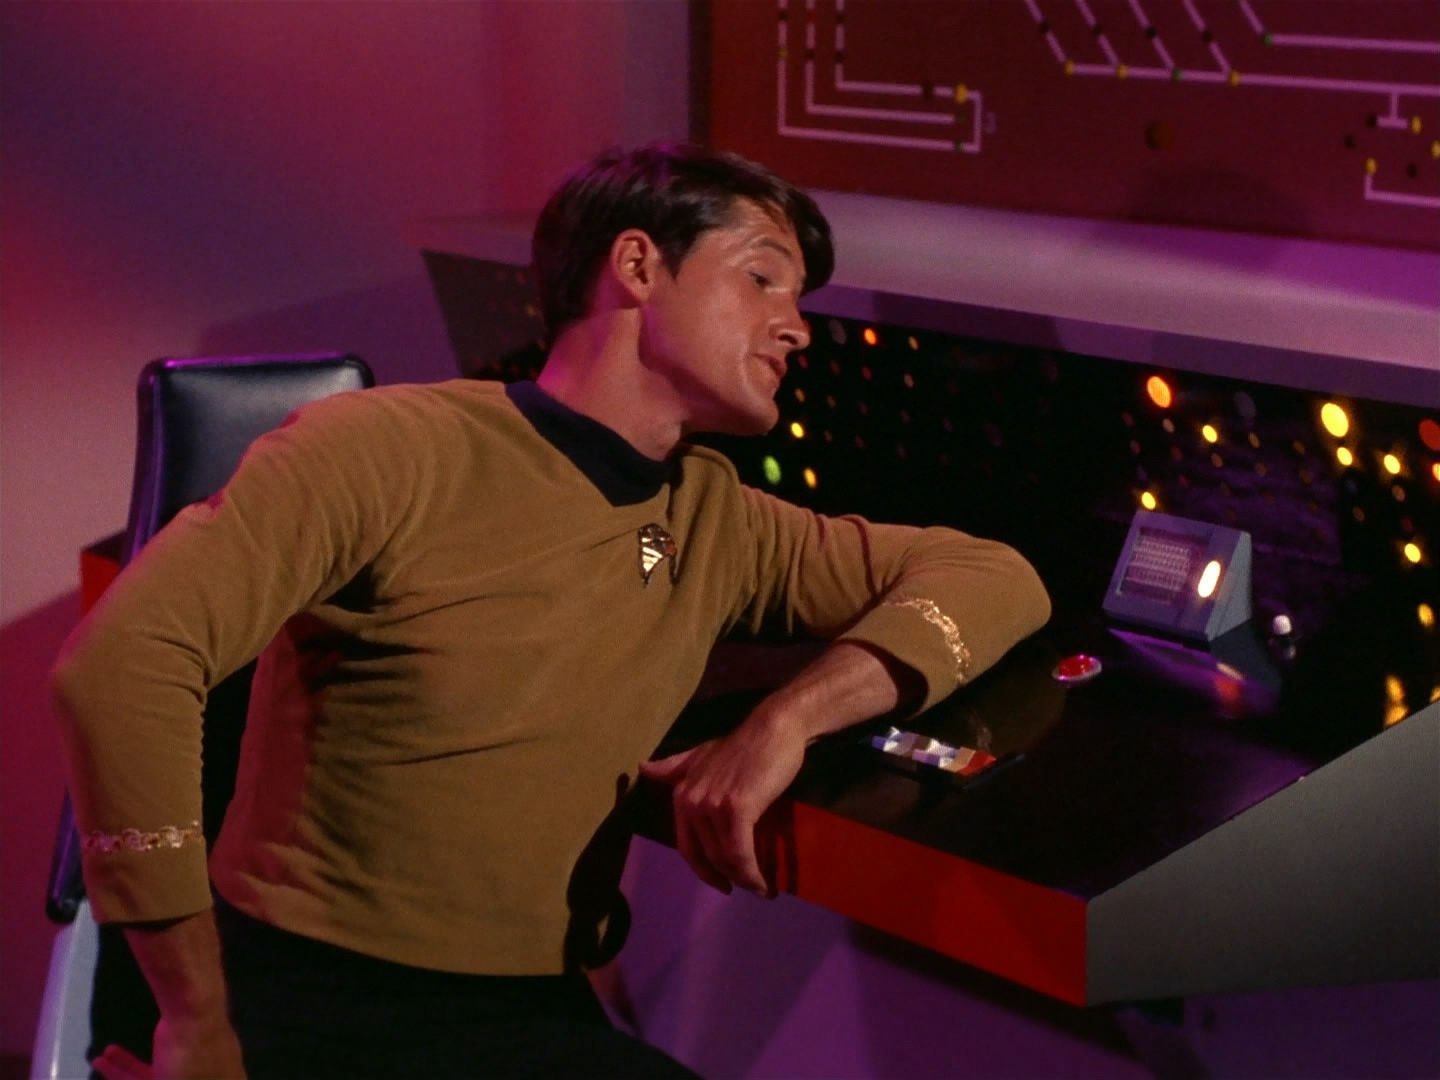 Kevin Riley in The Naked Time Star Trek